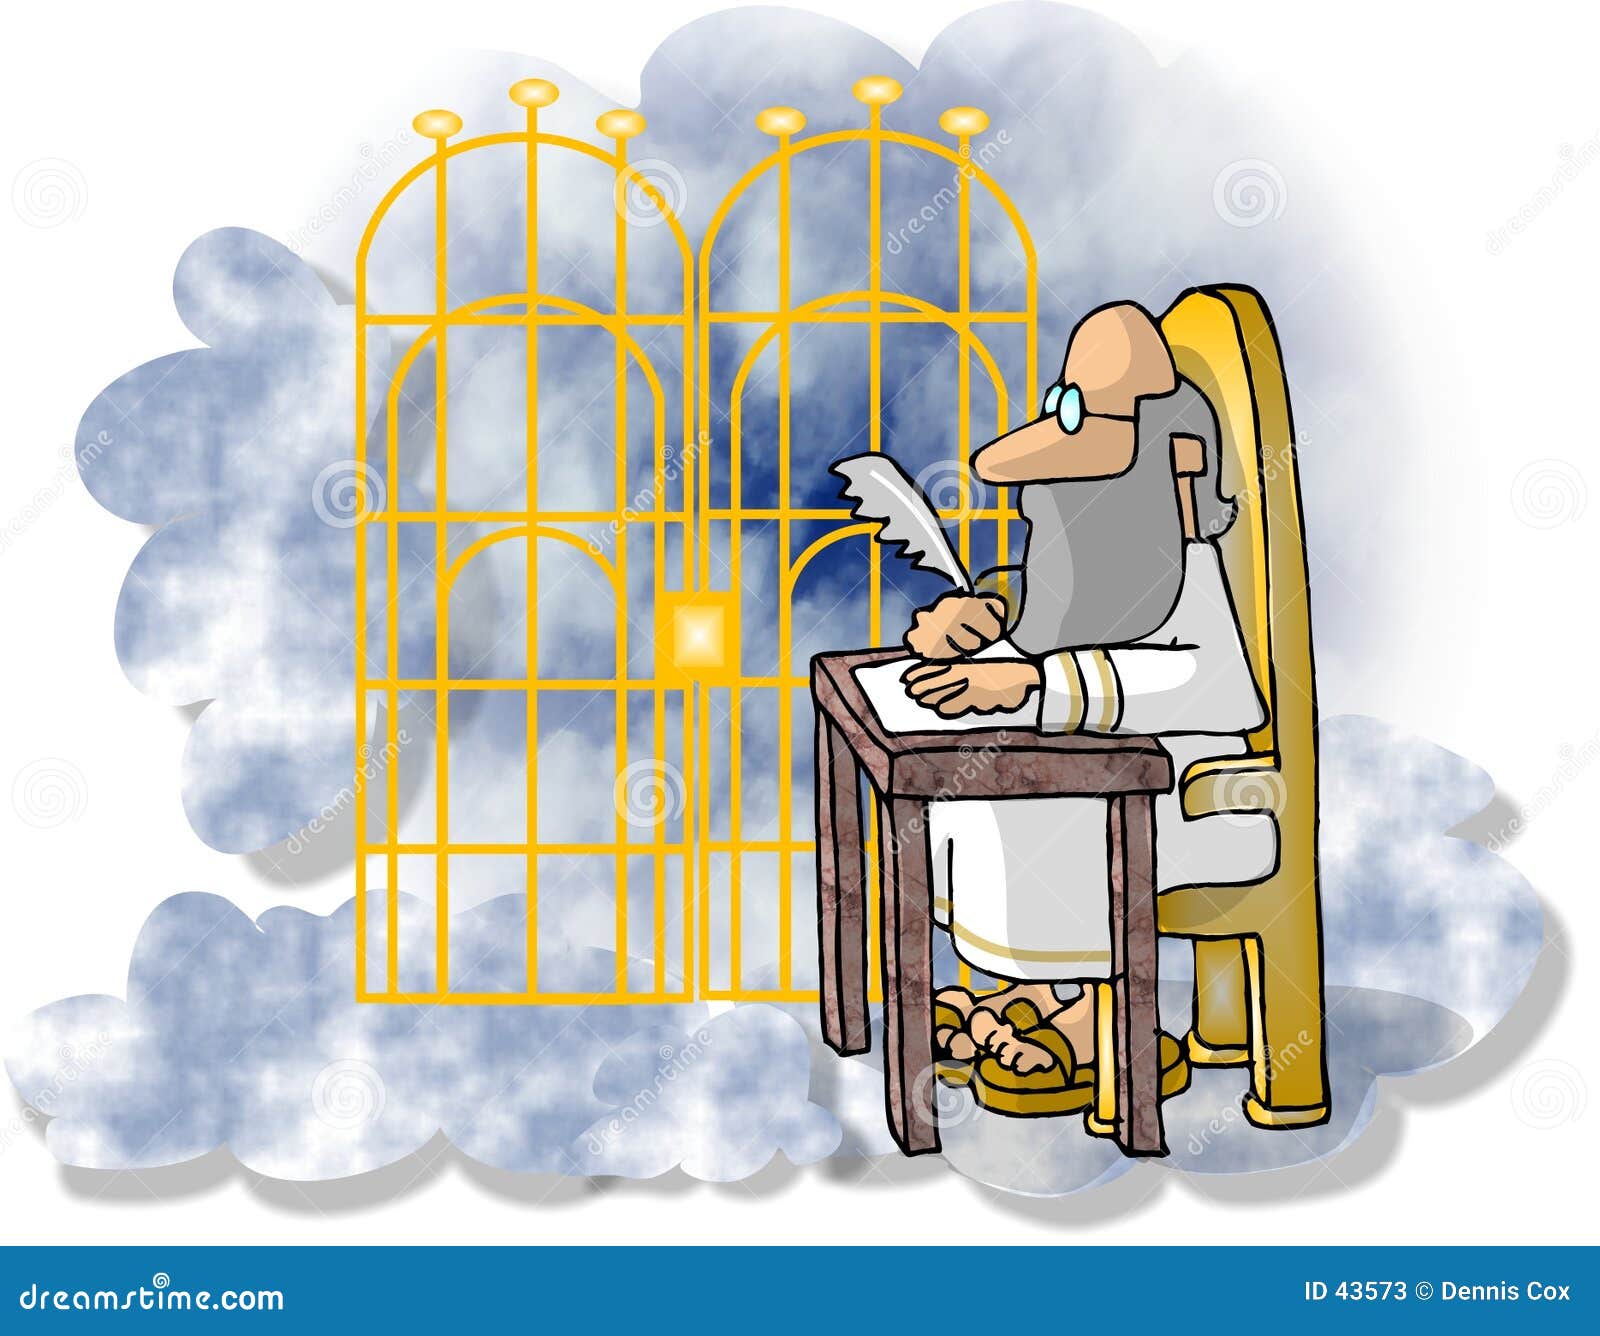 pearly gates clipart - photo #3